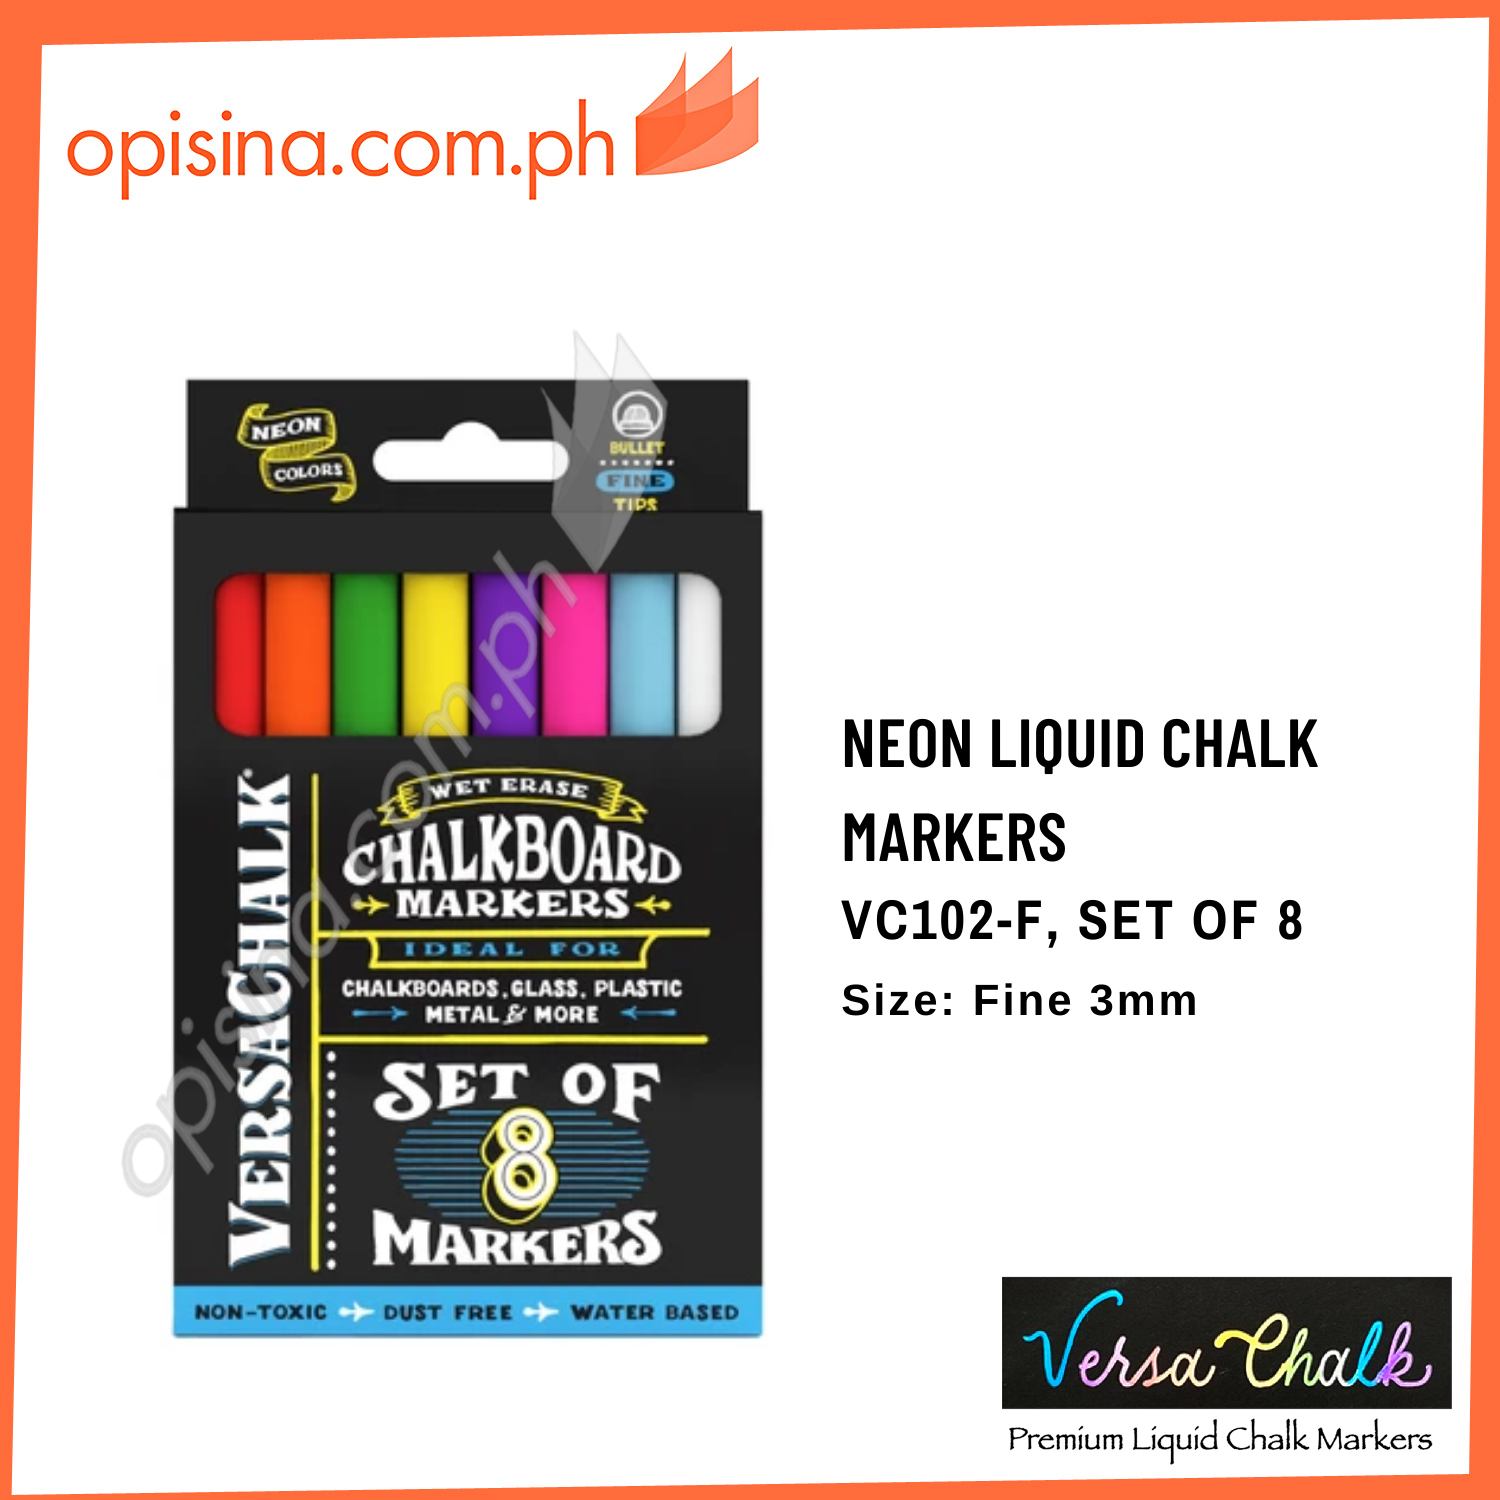 Multicolor Non-Toxic 5 mm | Dust Free Water-Based Wet Erase Chalk Ink Pens VersaChalk VC102-B Chalkboard Chalk Markers By 8-Pack 